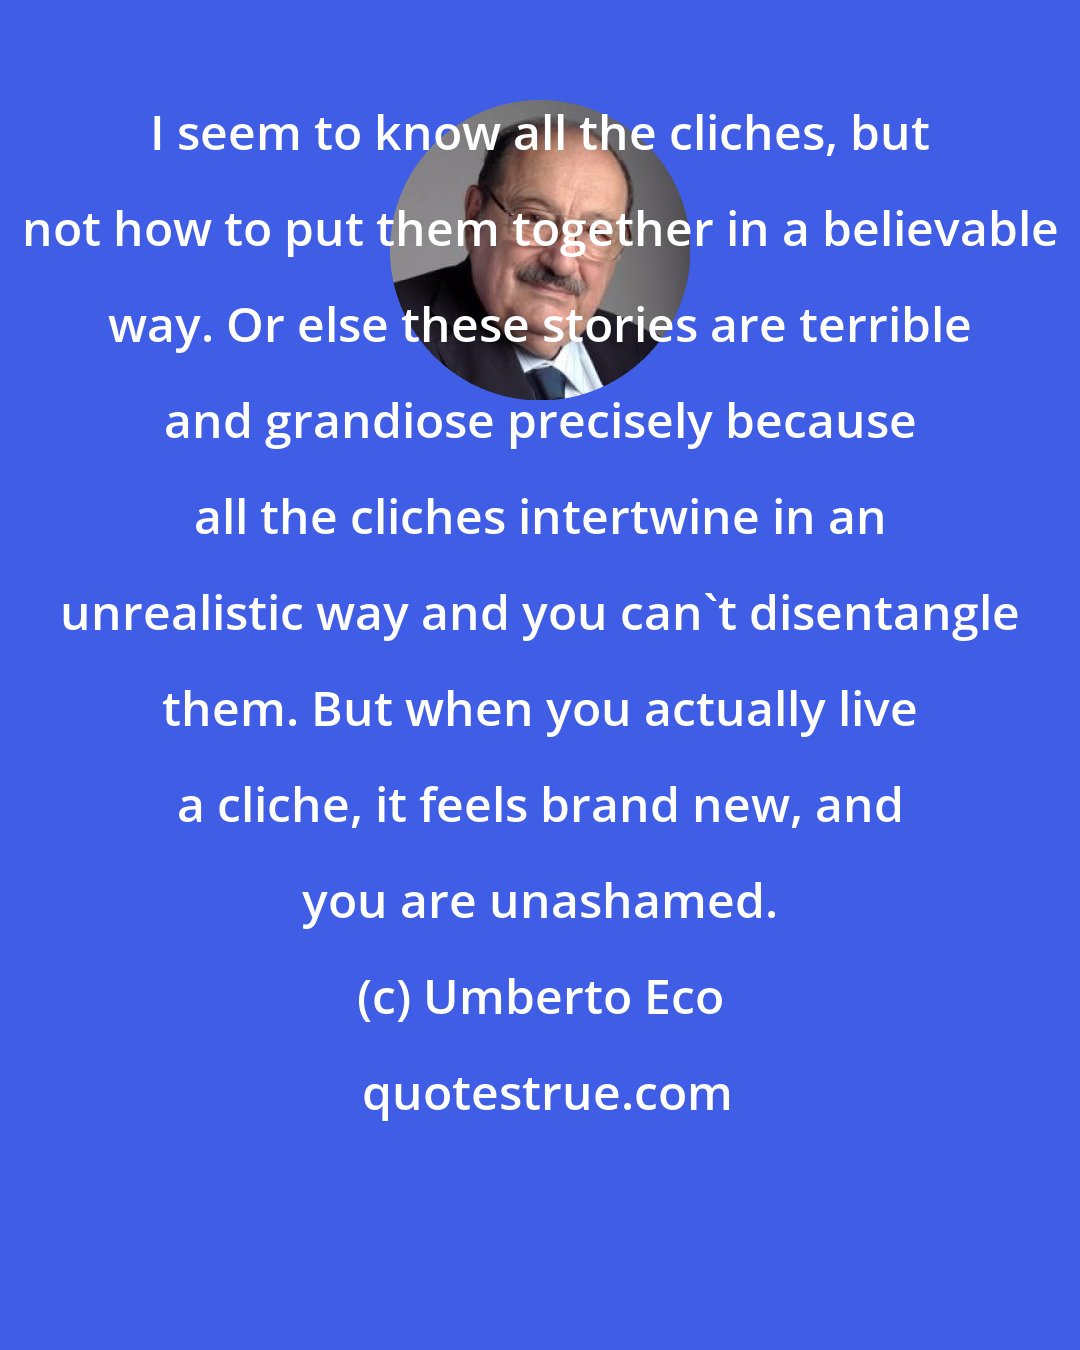 Umberto Eco: I seem to know all the cliches, but not how to put them together in a believable way. Or else these stories are terrible and grandiose precisely because all the cliches intertwine in an unrealistic way and you can't disentangle them. But when you actually live a cliche, it feels brand new, and you are unashamed.